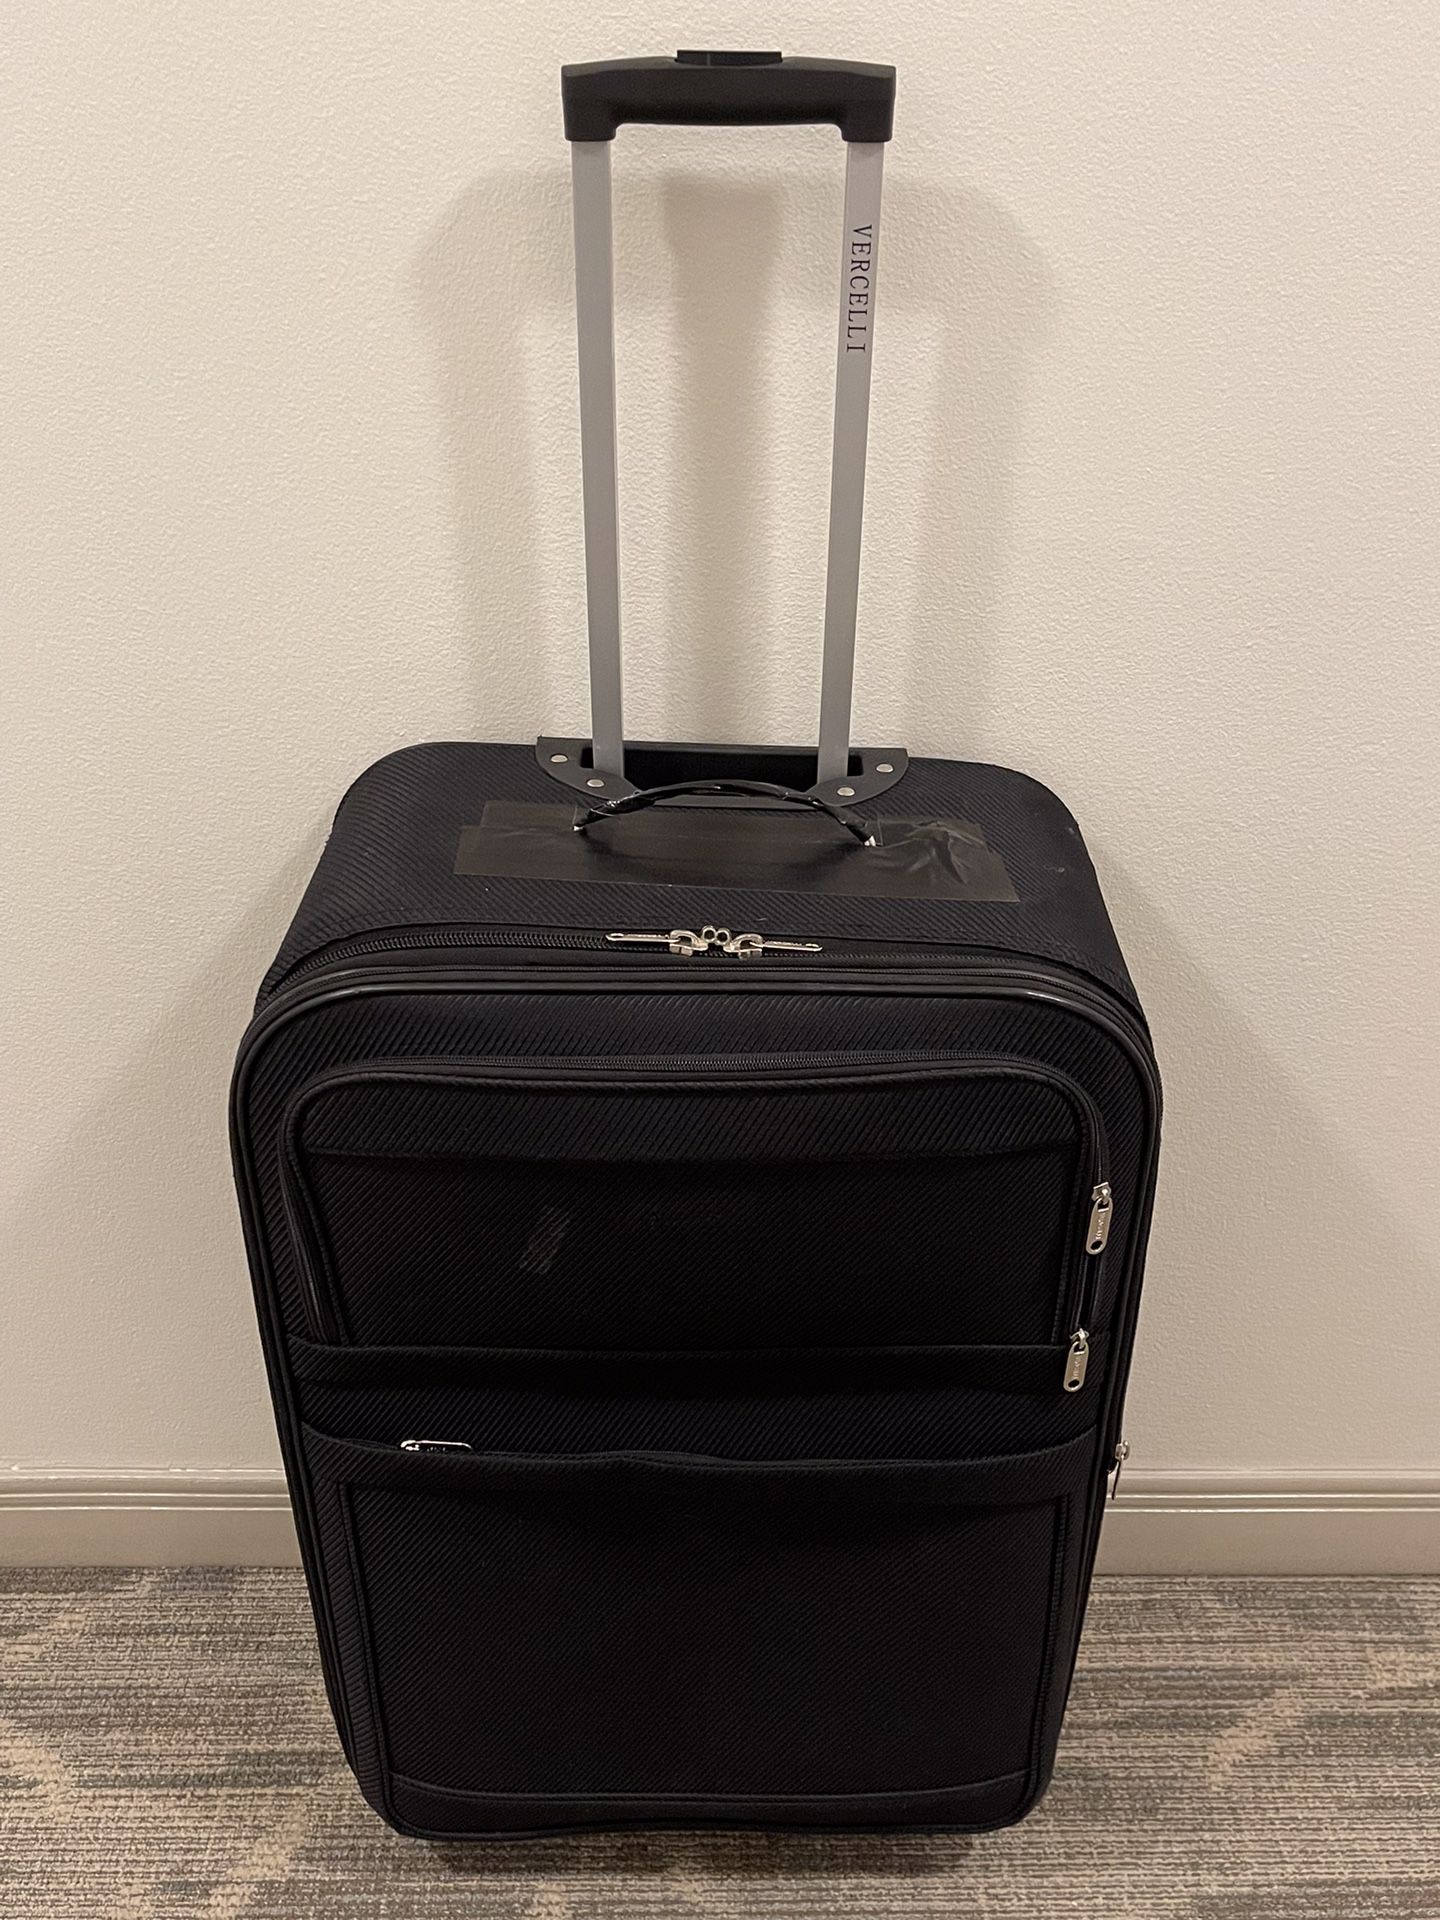 Large 28" BLACK, Lightweight,  4-Wheel, Soft-Side Pivoting LUGGAGE (imperfect, still functional) - firm price